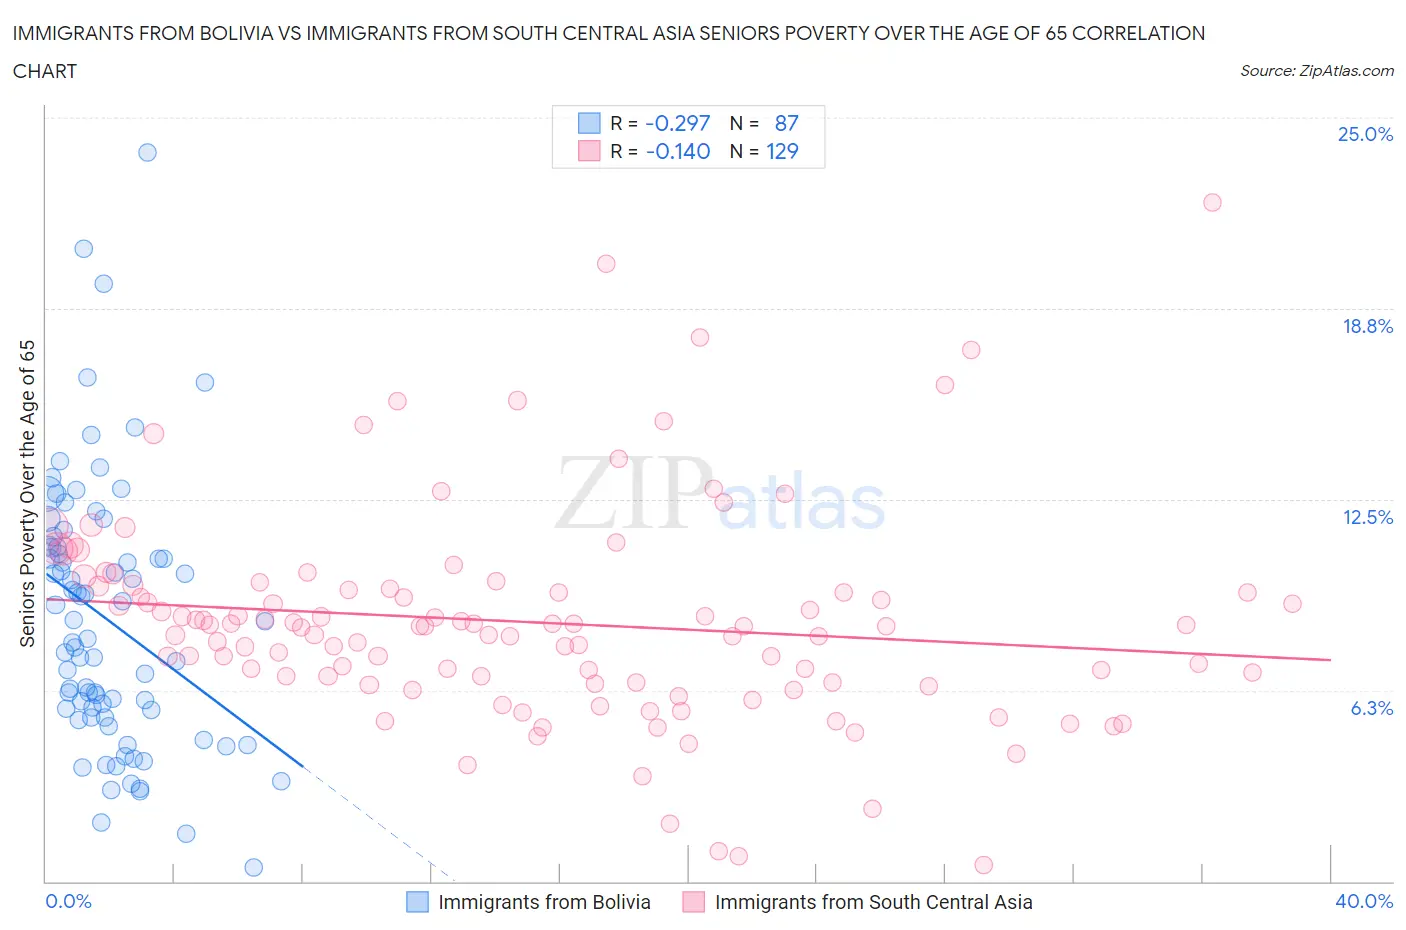 Immigrants from Bolivia vs Immigrants from South Central Asia Seniors Poverty Over the Age of 65